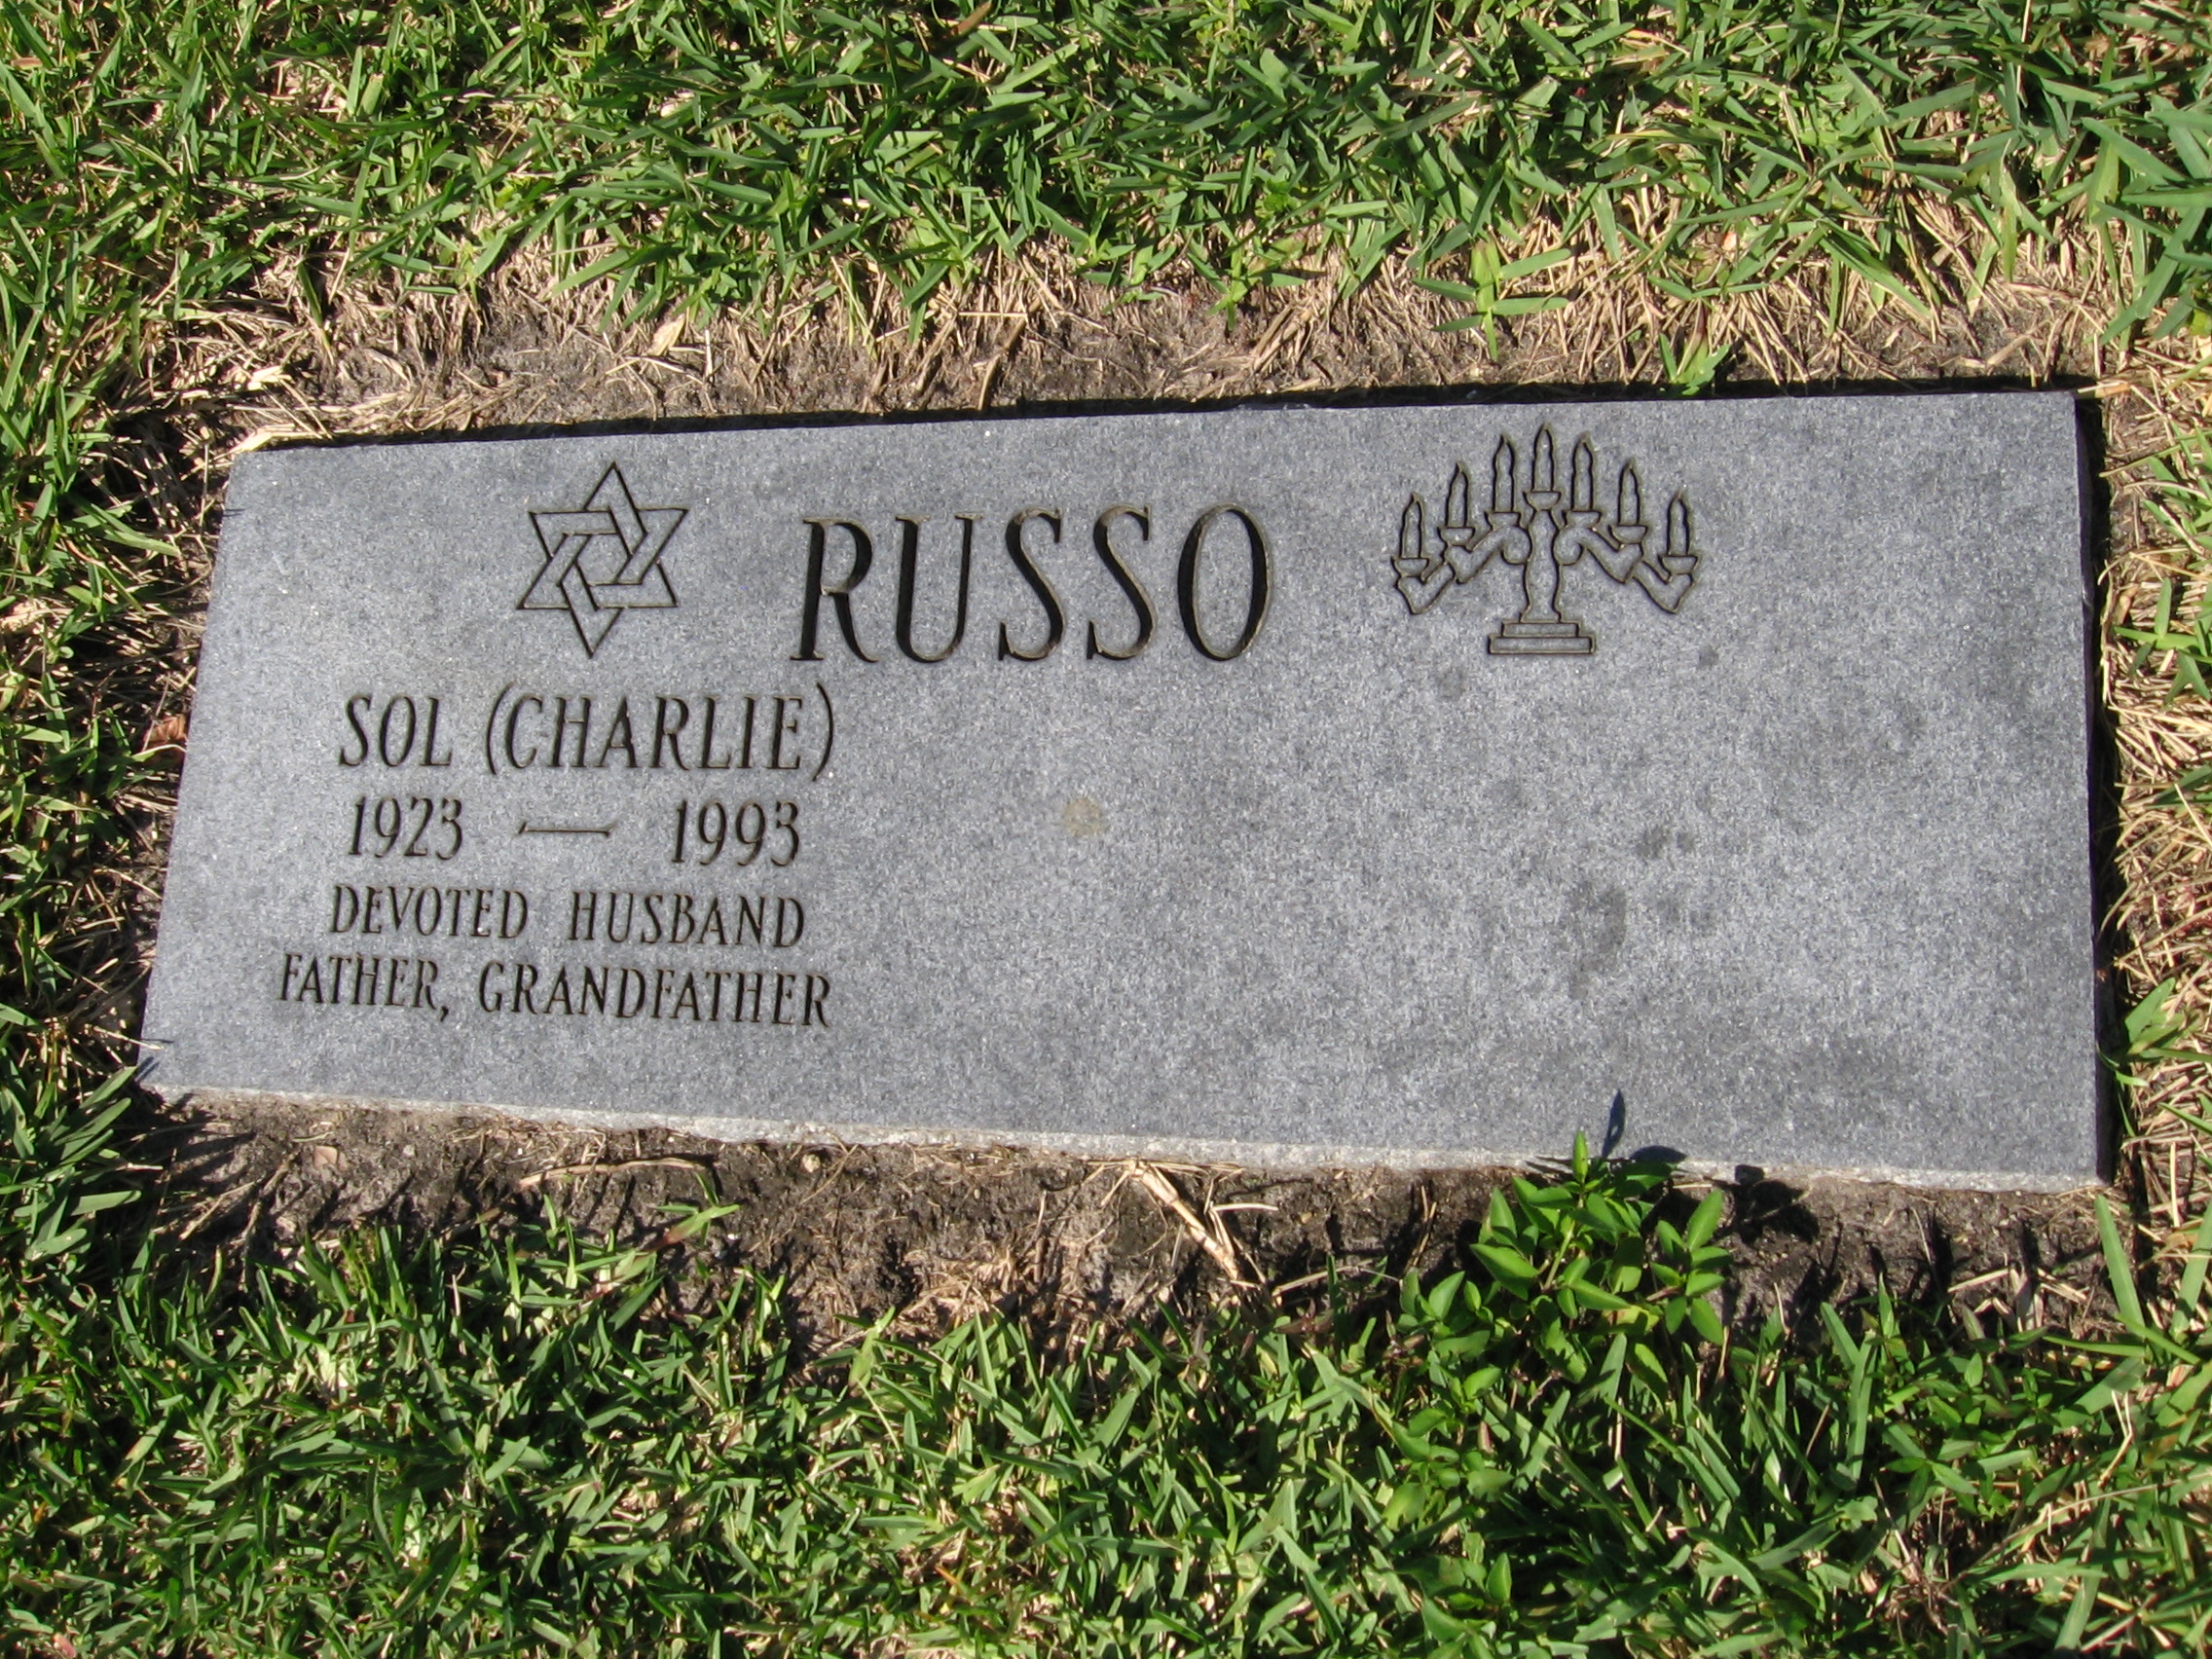 Sol "Charlie" Russo